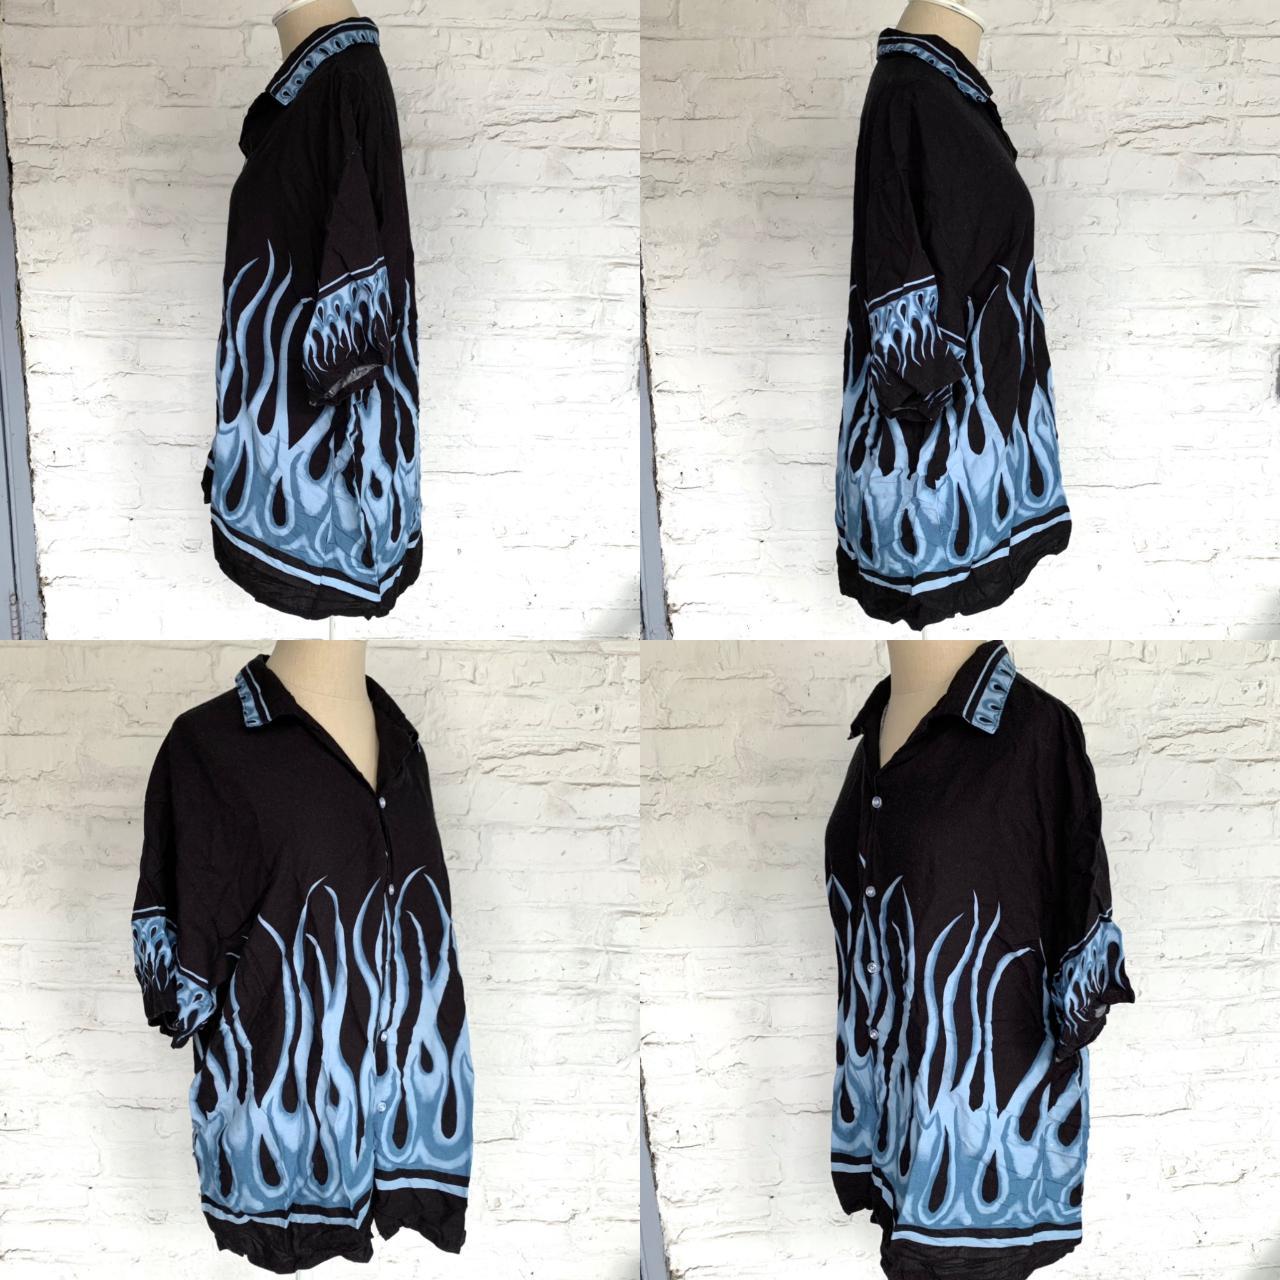 Product Image 3 - Flame shirt, black with blue